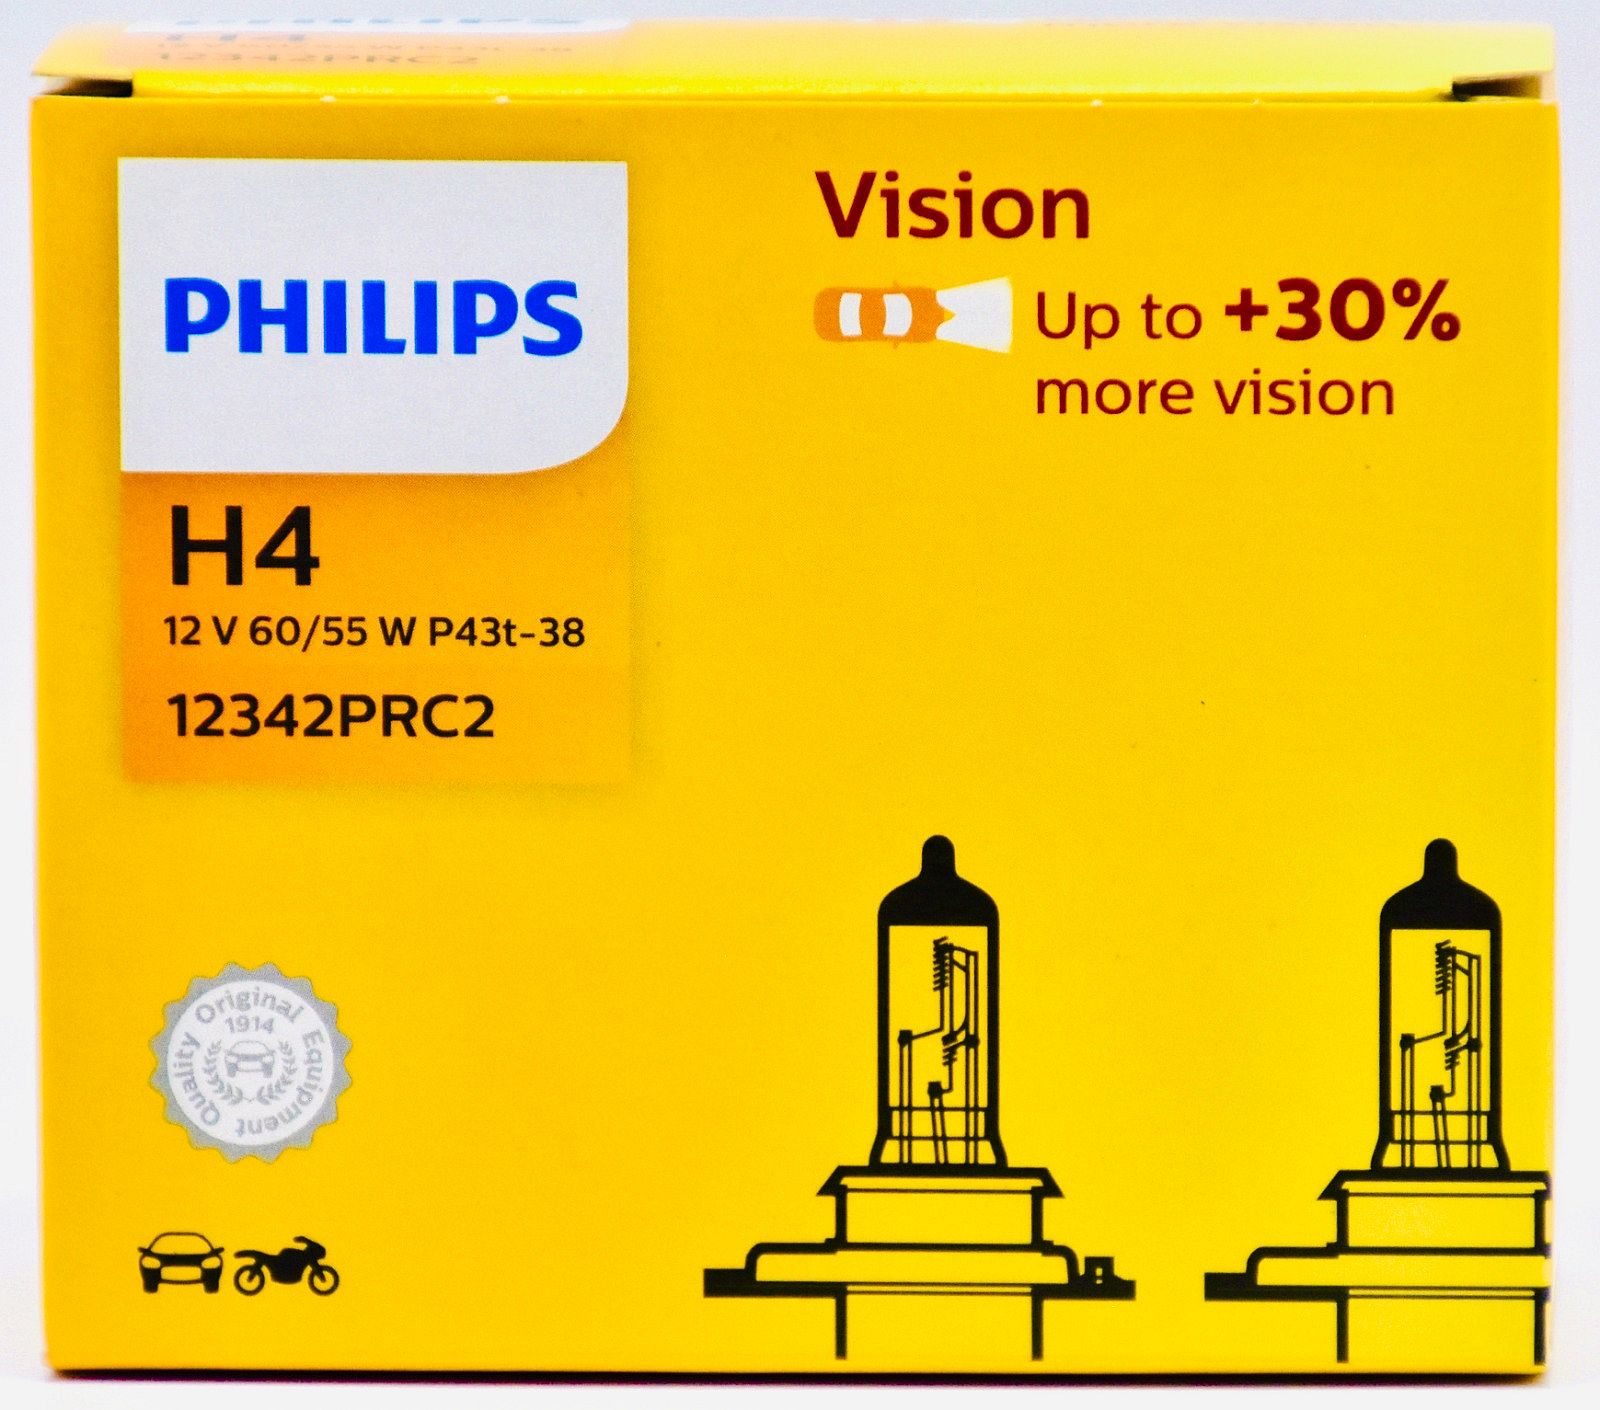 Филипс вижн. Philips Vision. Philips Vision excel. D Vision 30.